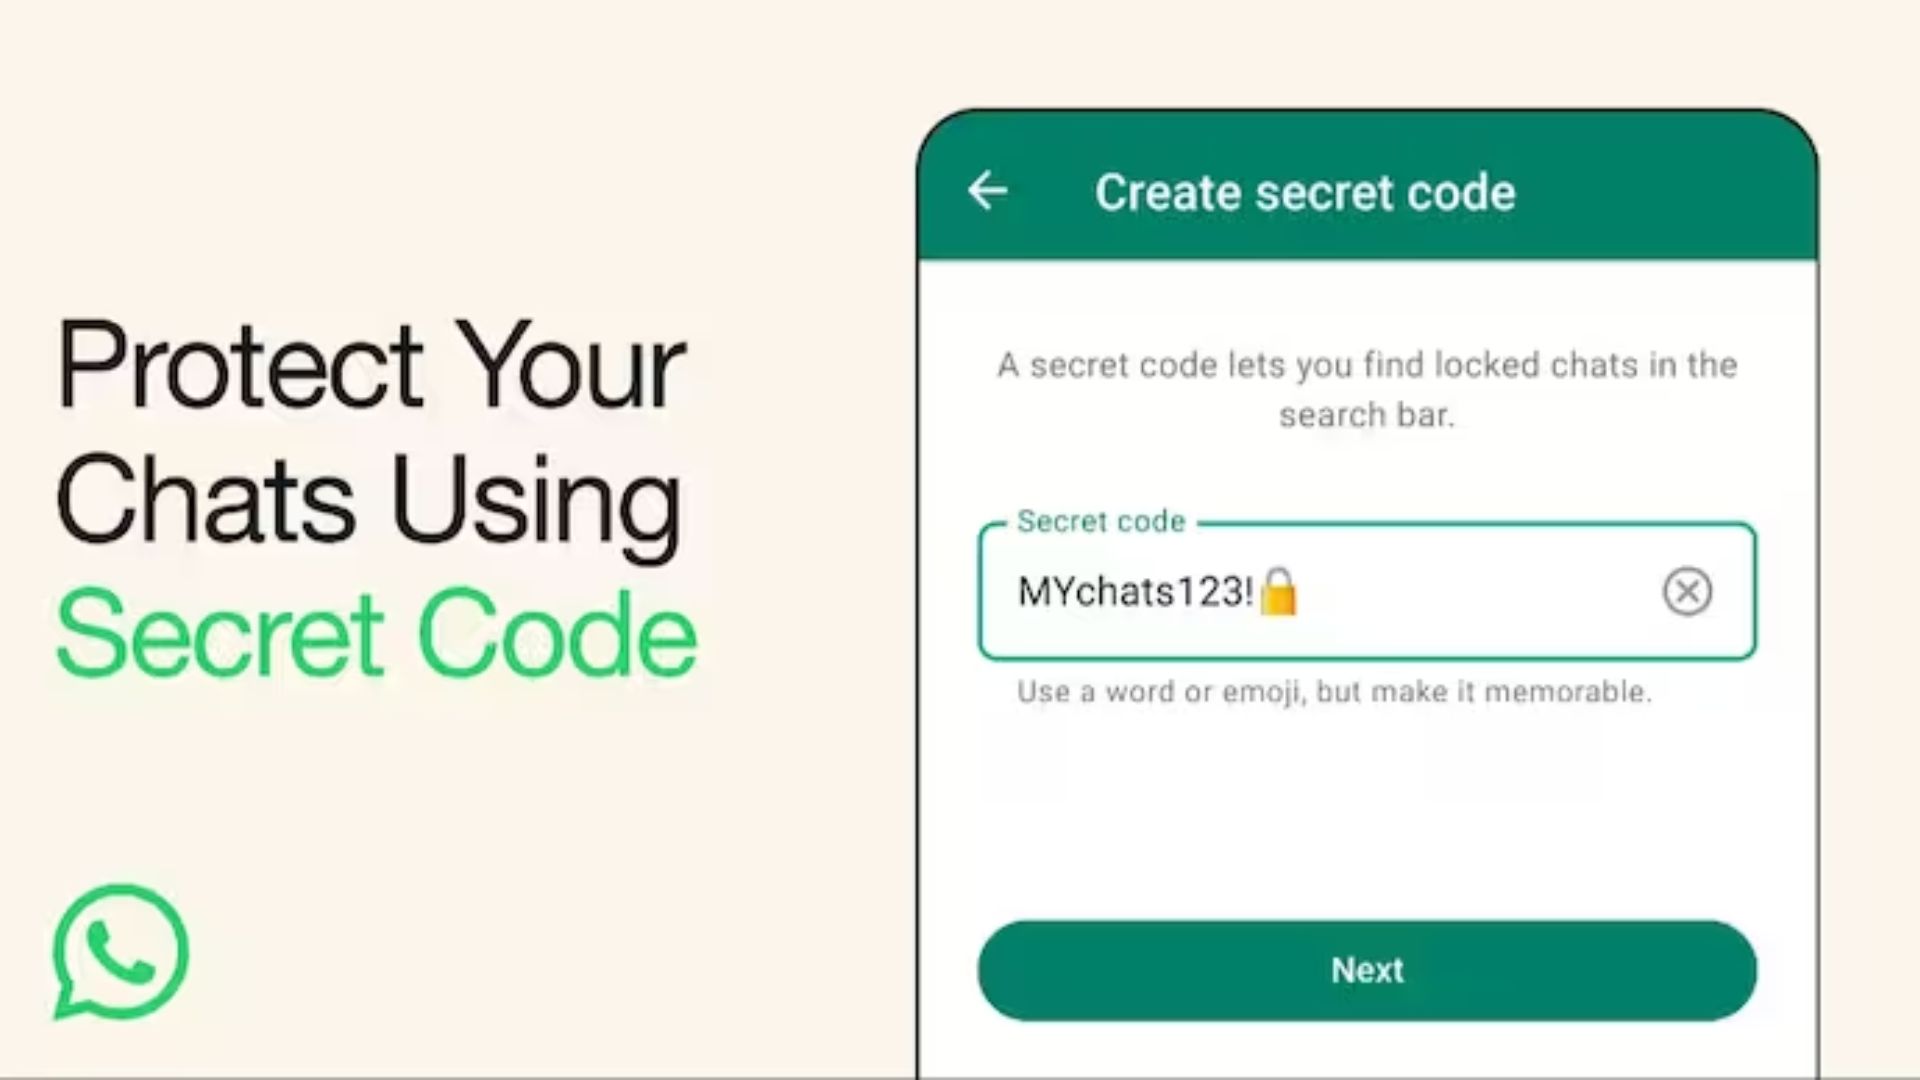 WhatsApp Introduces Secret Feature for Private Chats